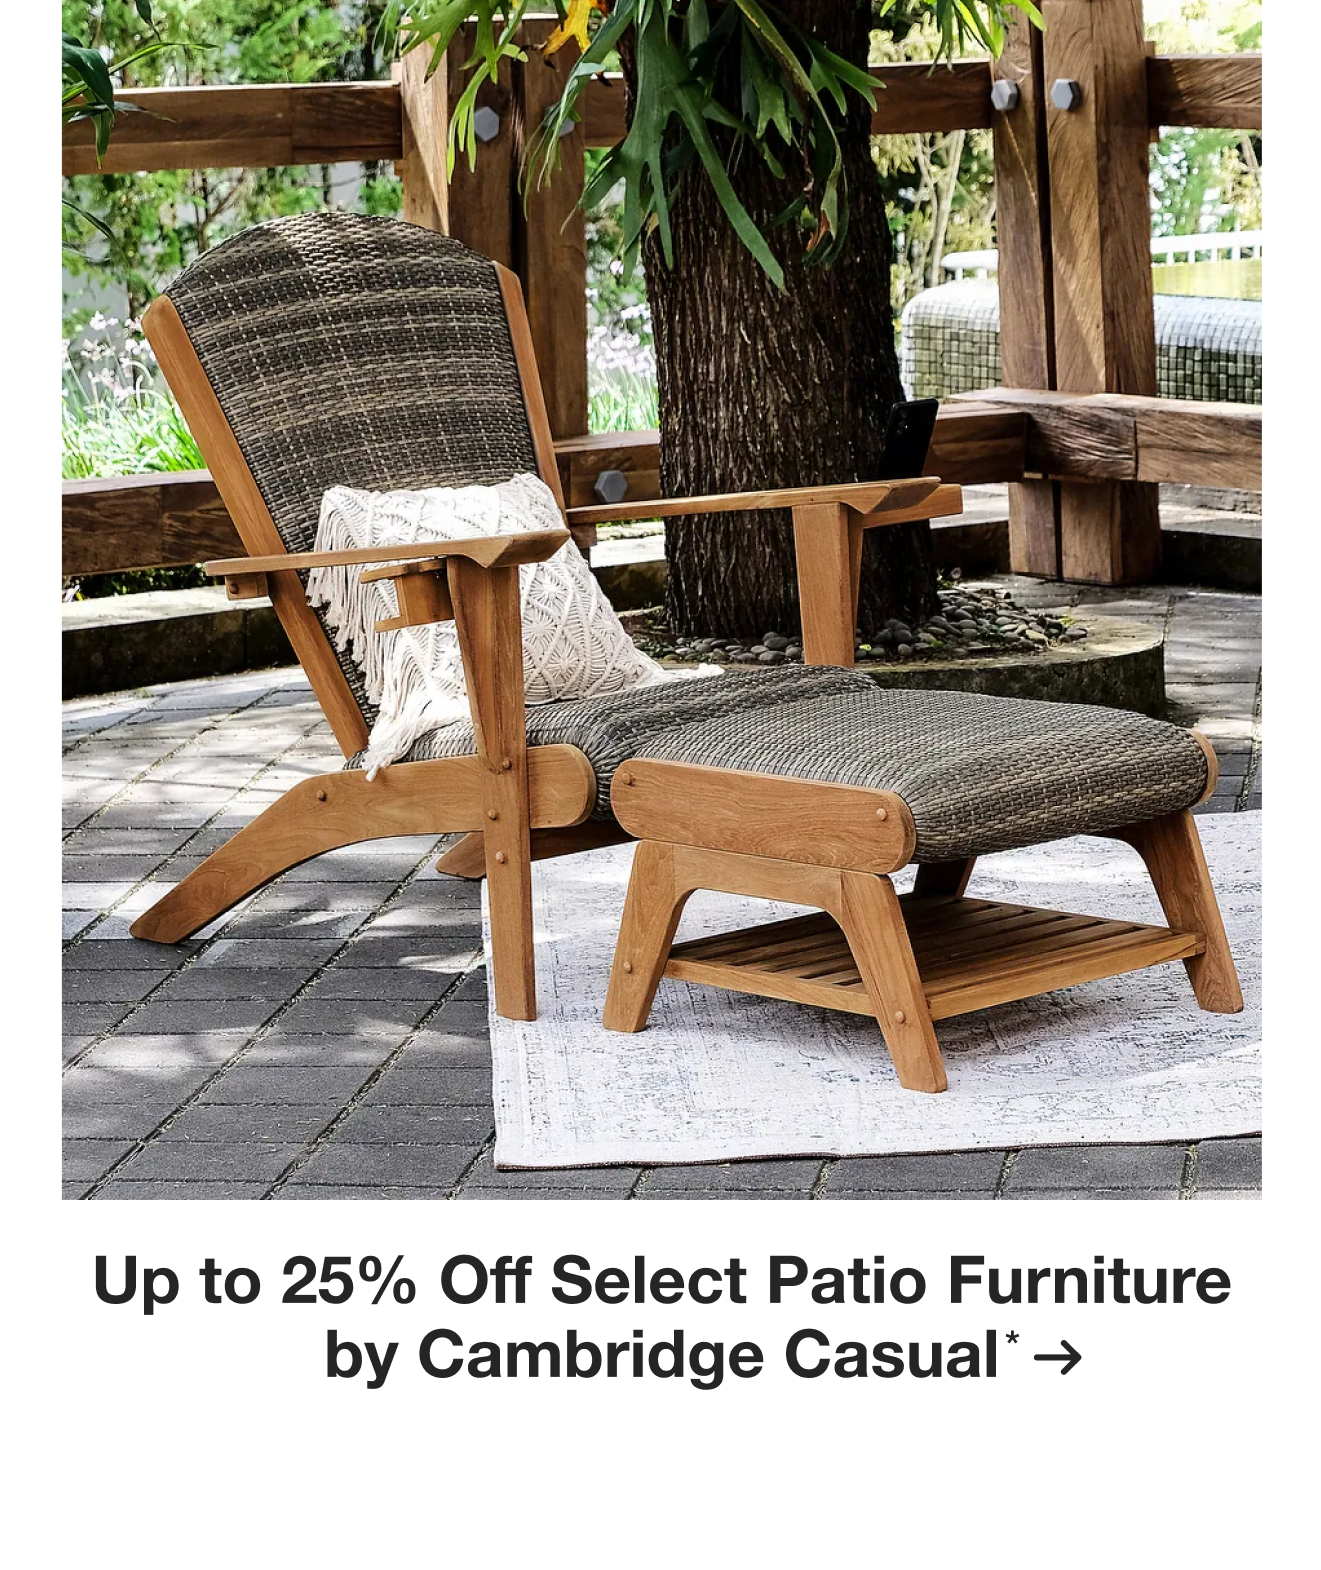 Up to 25% Off Select Patio Furniture by Cambridge Casual*